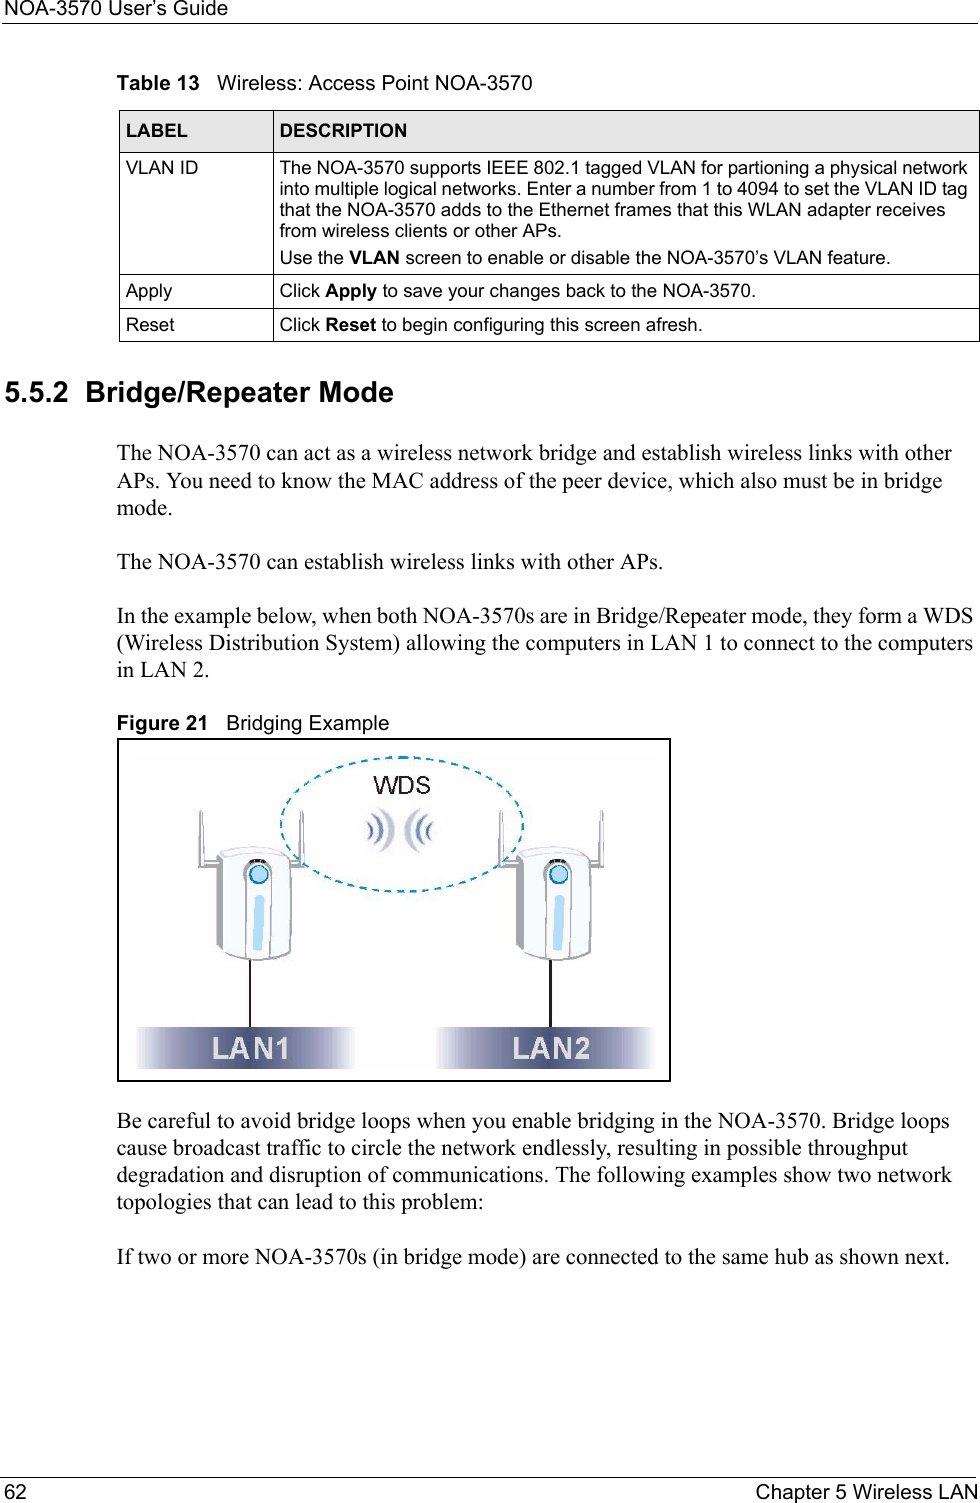 NOA-3570 User’s Guide62 Chapter 5 Wireless LAN5.5.2  Bridge/Repeater ModeThe NOA-3570 can act as a wireless network bridge and establish wireless links with other APs. You need to know the MAC address of the peer device, which also must be in bridge mode. The NOA-3570 can establish wireless links with other APs.In the example below, when both NOA-3570s are in Bridge/Repeater mode, they form a WDS (Wireless Distribution System) allowing the computers in LAN 1 to connect to the computers in LAN 2. Figure 21   Bridging ExampleBe careful to avoid bridge loops when you enable bridging in the NOA-3570. Bridge loops cause broadcast traffic to circle the network endlessly, resulting in possible throughput degradation and disruption of communications. The following examples show two network topologies that can lead to this problem: If two or more NOA-3570s (in bridge mode) are connected to the same hub as shown next.VLAN ID The NOA-3570 supports IEEE 802.1 tagged VLAN for partioning a physical network into multiple logical networks. Enter a number from 1 to 4094 to set the VLAN ID tag that the NOA-3570 adds to the Ethernet frames that this WLAN adapter receives from wireless clients or other APs. Use the VLAN screen to enable or disable the NOA-3570’s VLAN feature.Apply Click Apply to save your changes back to the NOA-3570.Reset Click Reset to begin configuring this screen afresh.Table 13   Wireless: Access Point NOA-3570LABEL DESCRIPTION